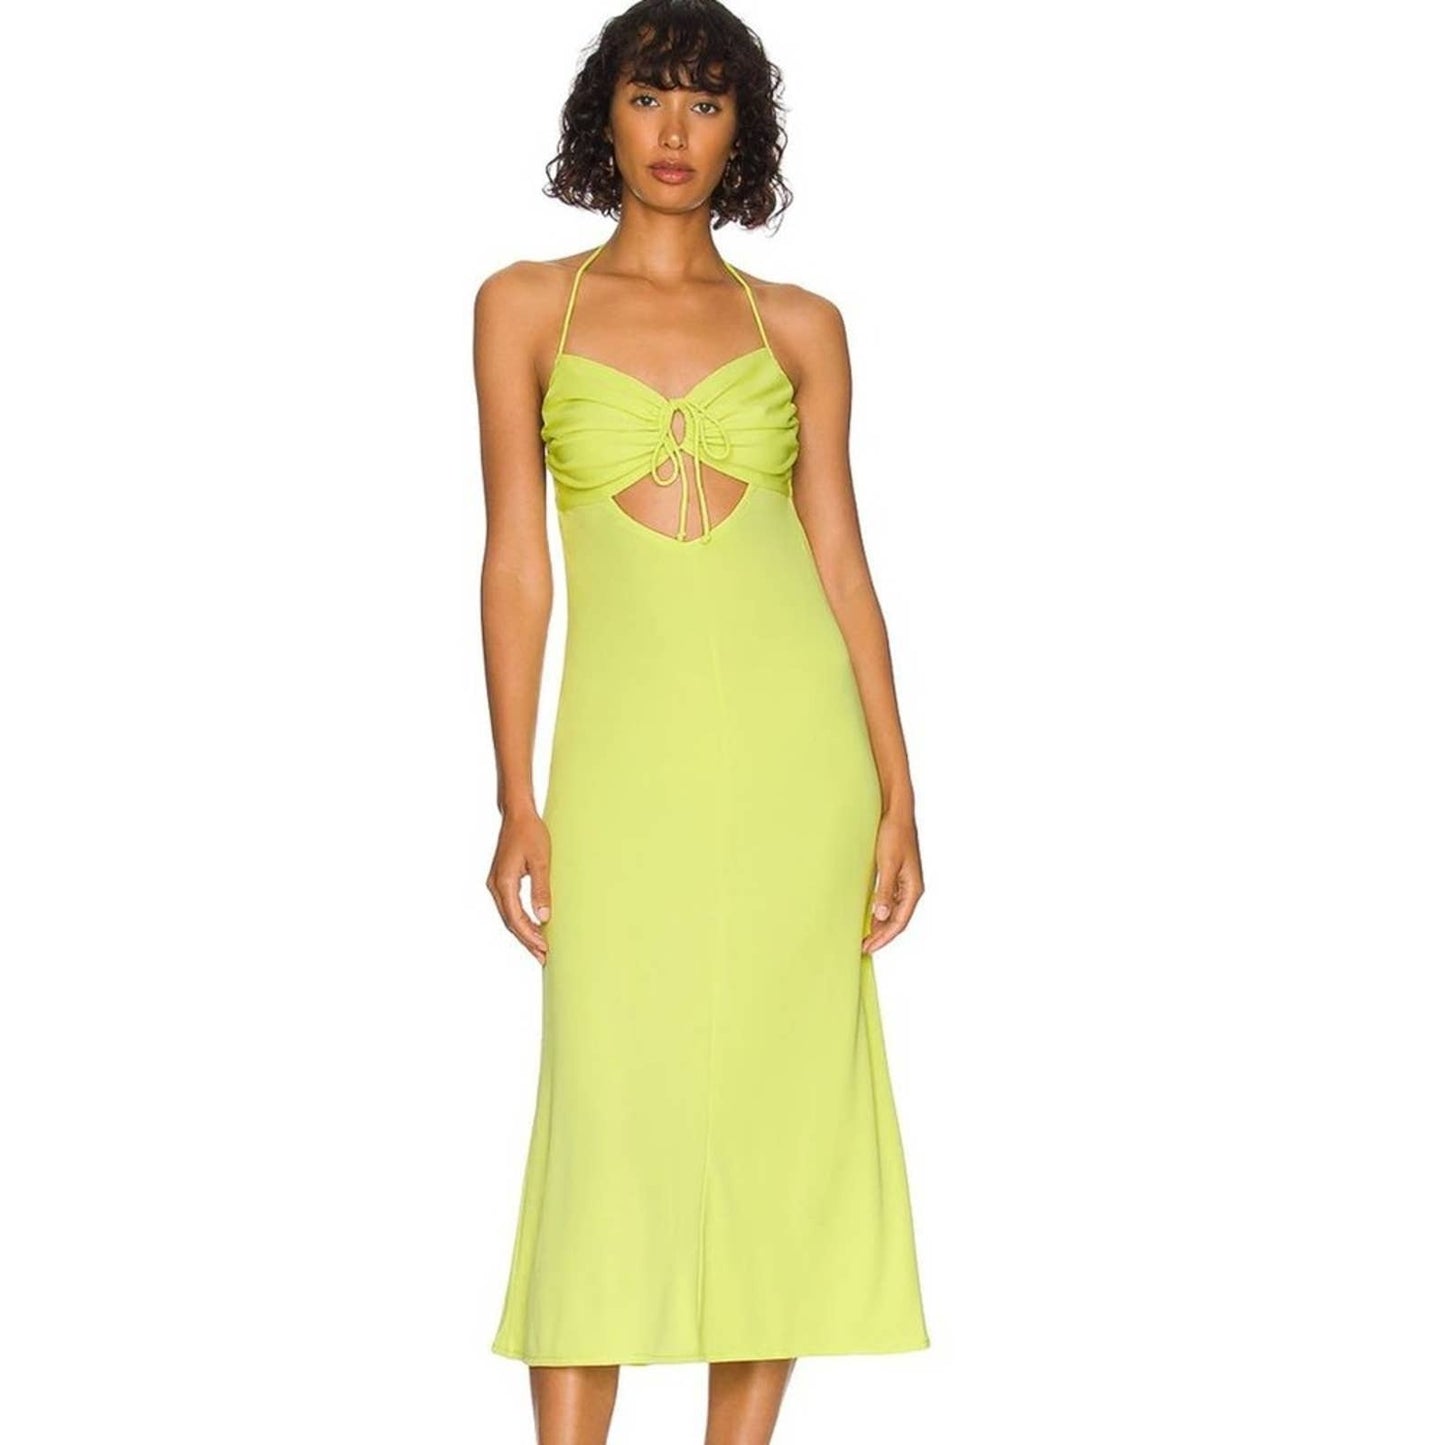 L'Academie Mira Midi Dress in Limelight NWOT Size Small